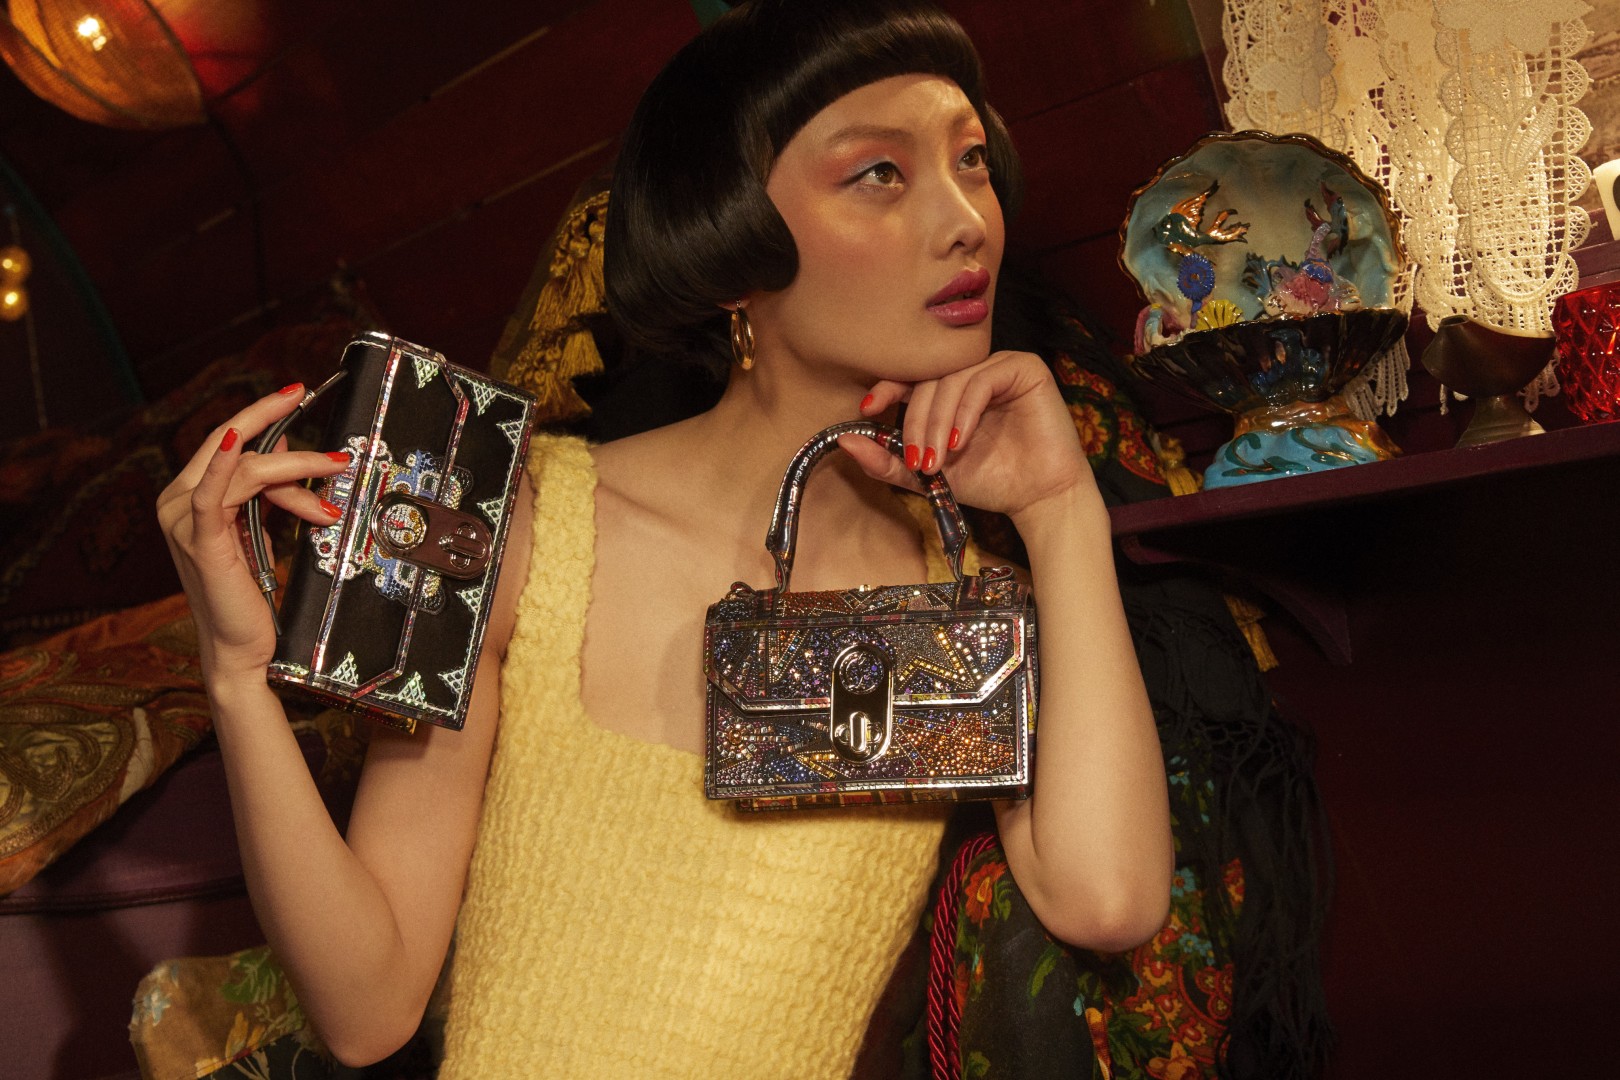 Bedrift Poesi sommerfugl Celebrate the New Year with 5 sparkly, jewel-like bags by Chanel, Dolce &  Gabbana, Christian Louboutin, Alexander McQueen and Jil Sander | South  China Morning Post